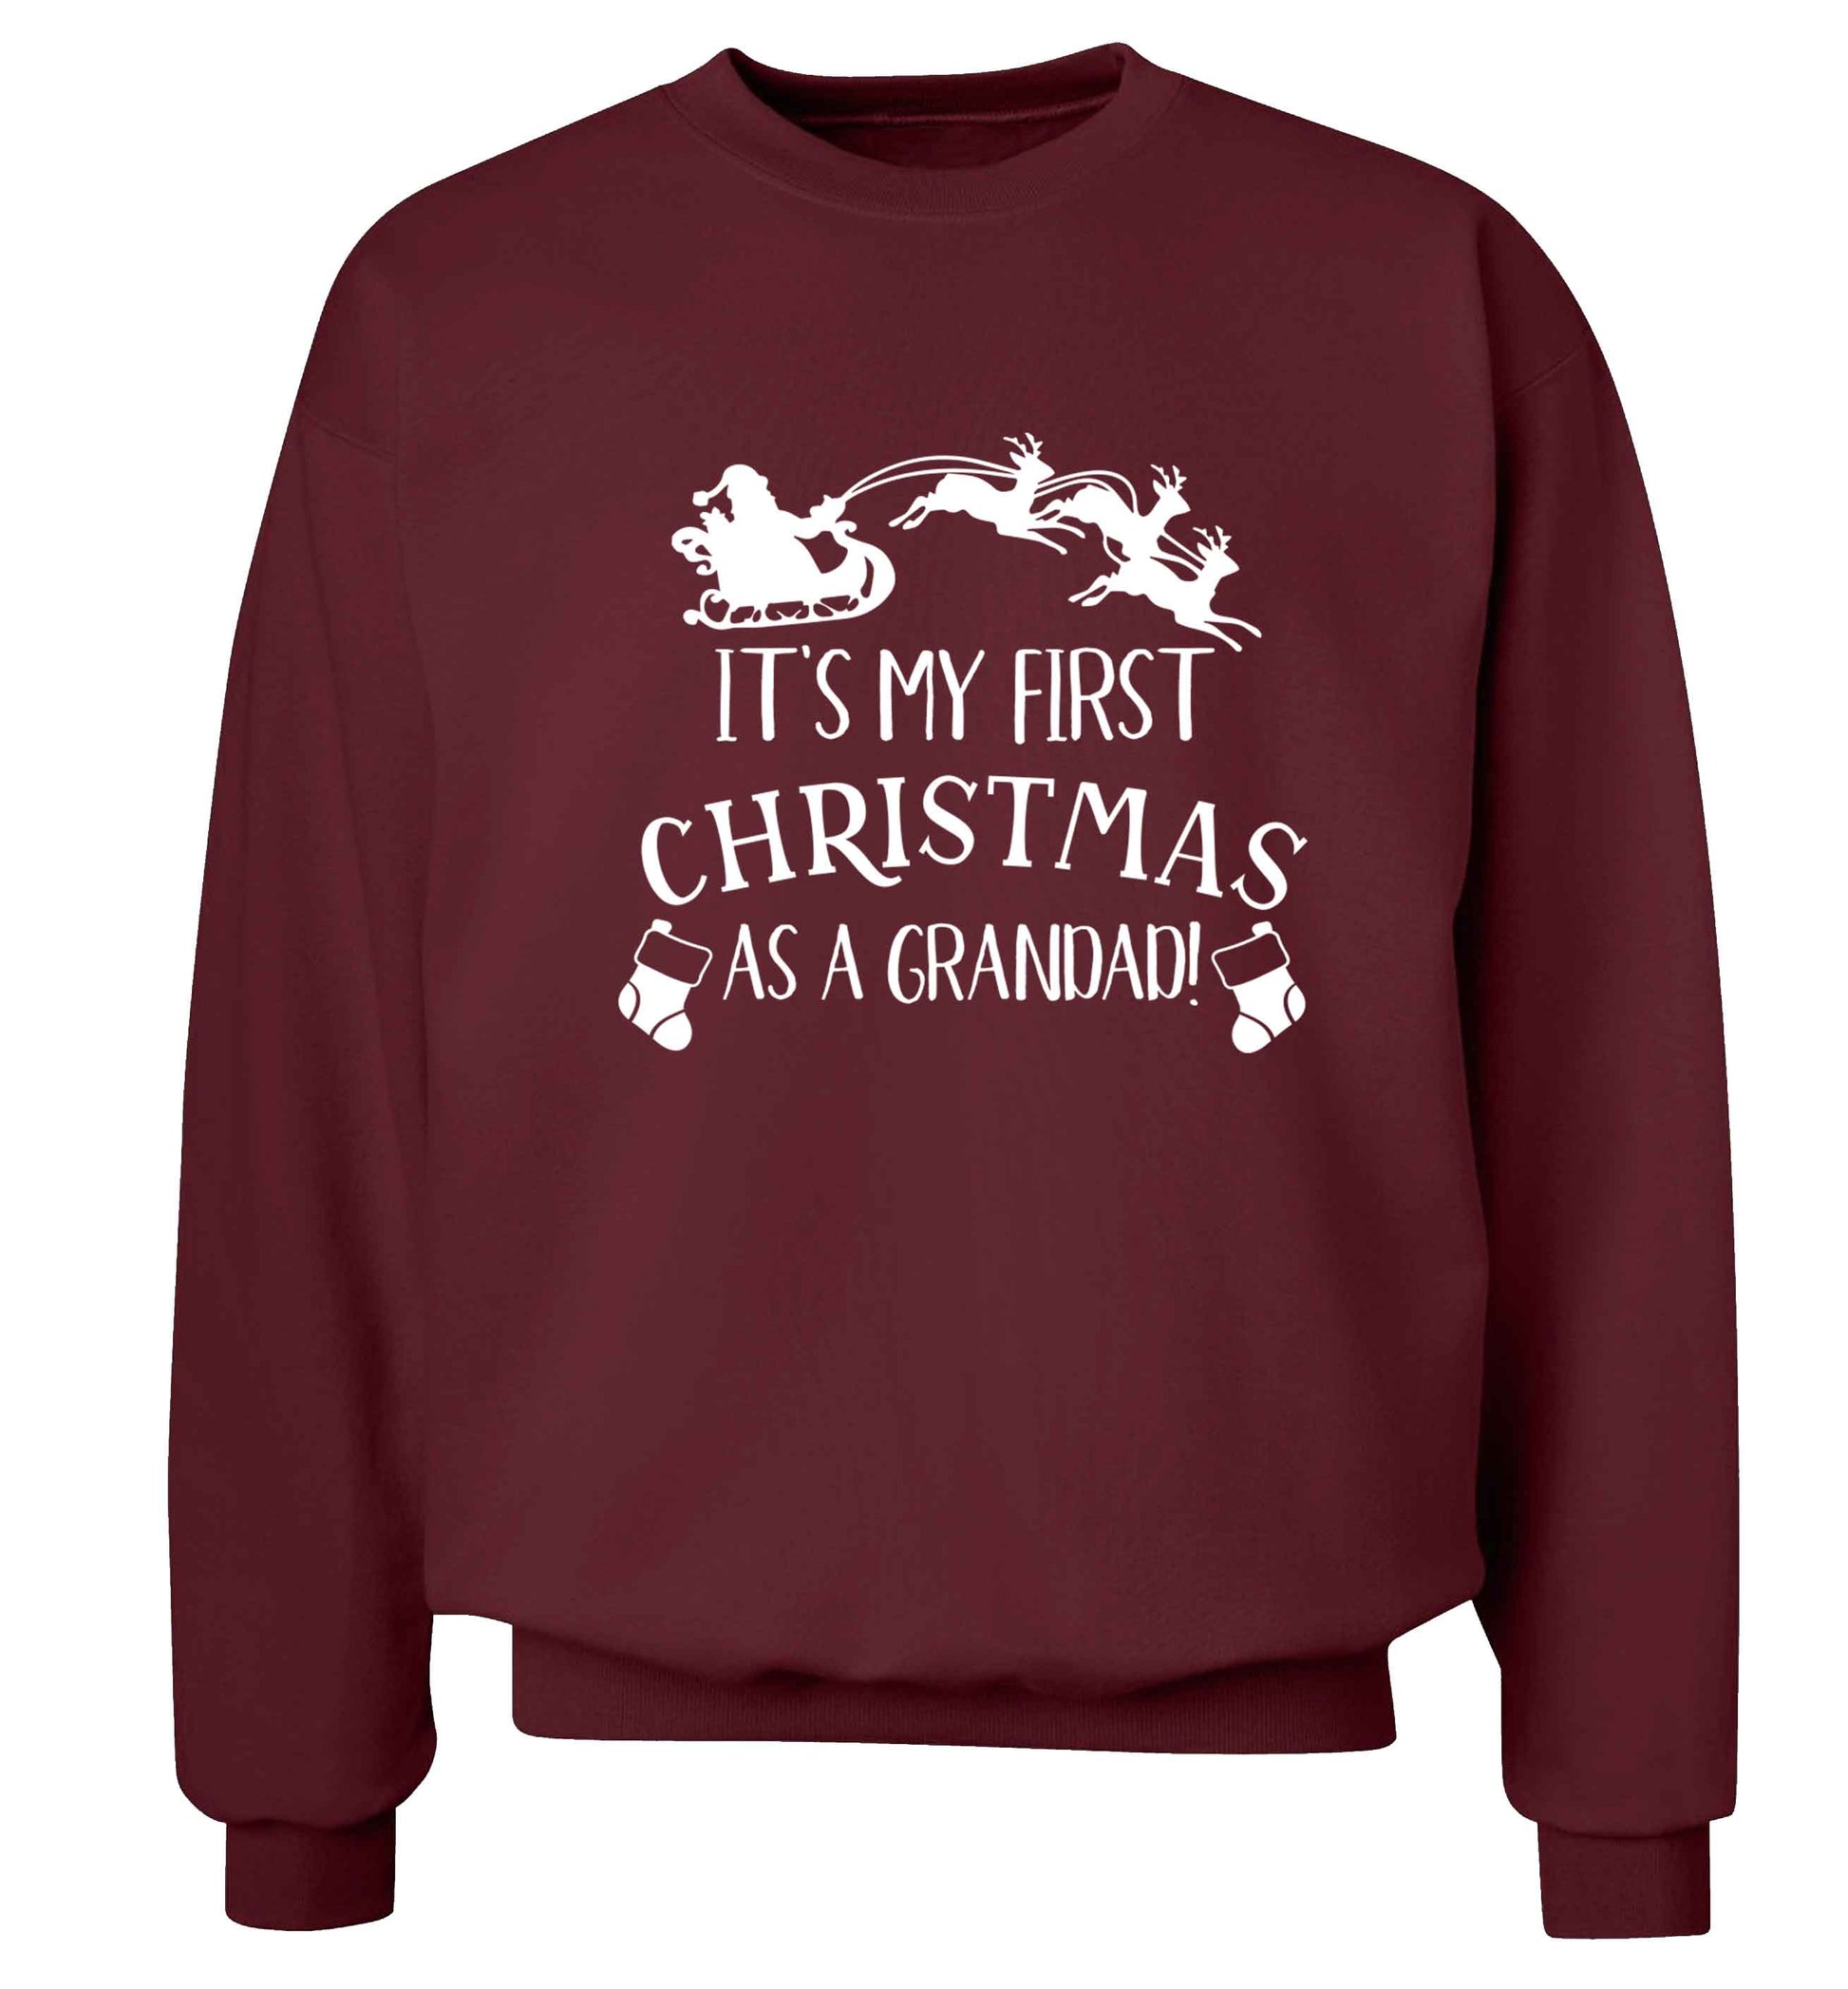 It's my first Christmas as a grandad! Adult's unisex maroon Sweater 2XL